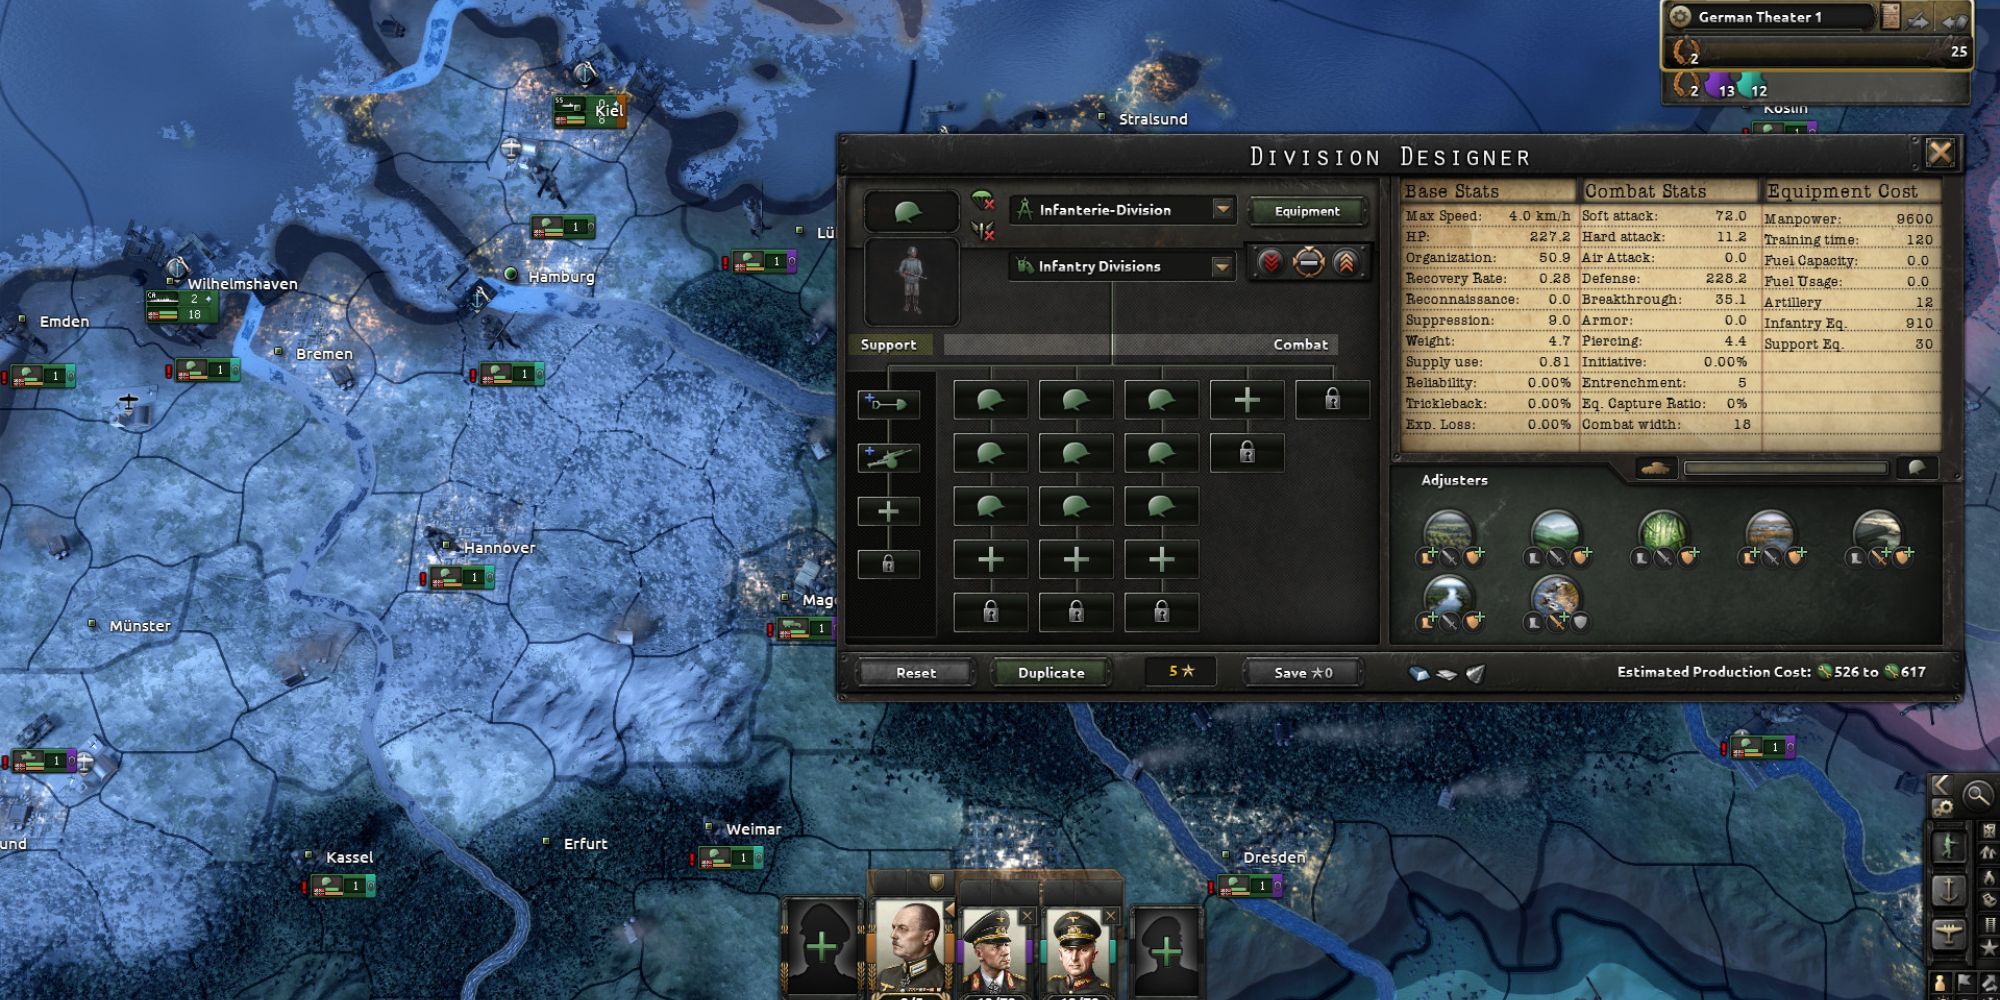 A player looking at the Division Designer in Hearts of Iron 4